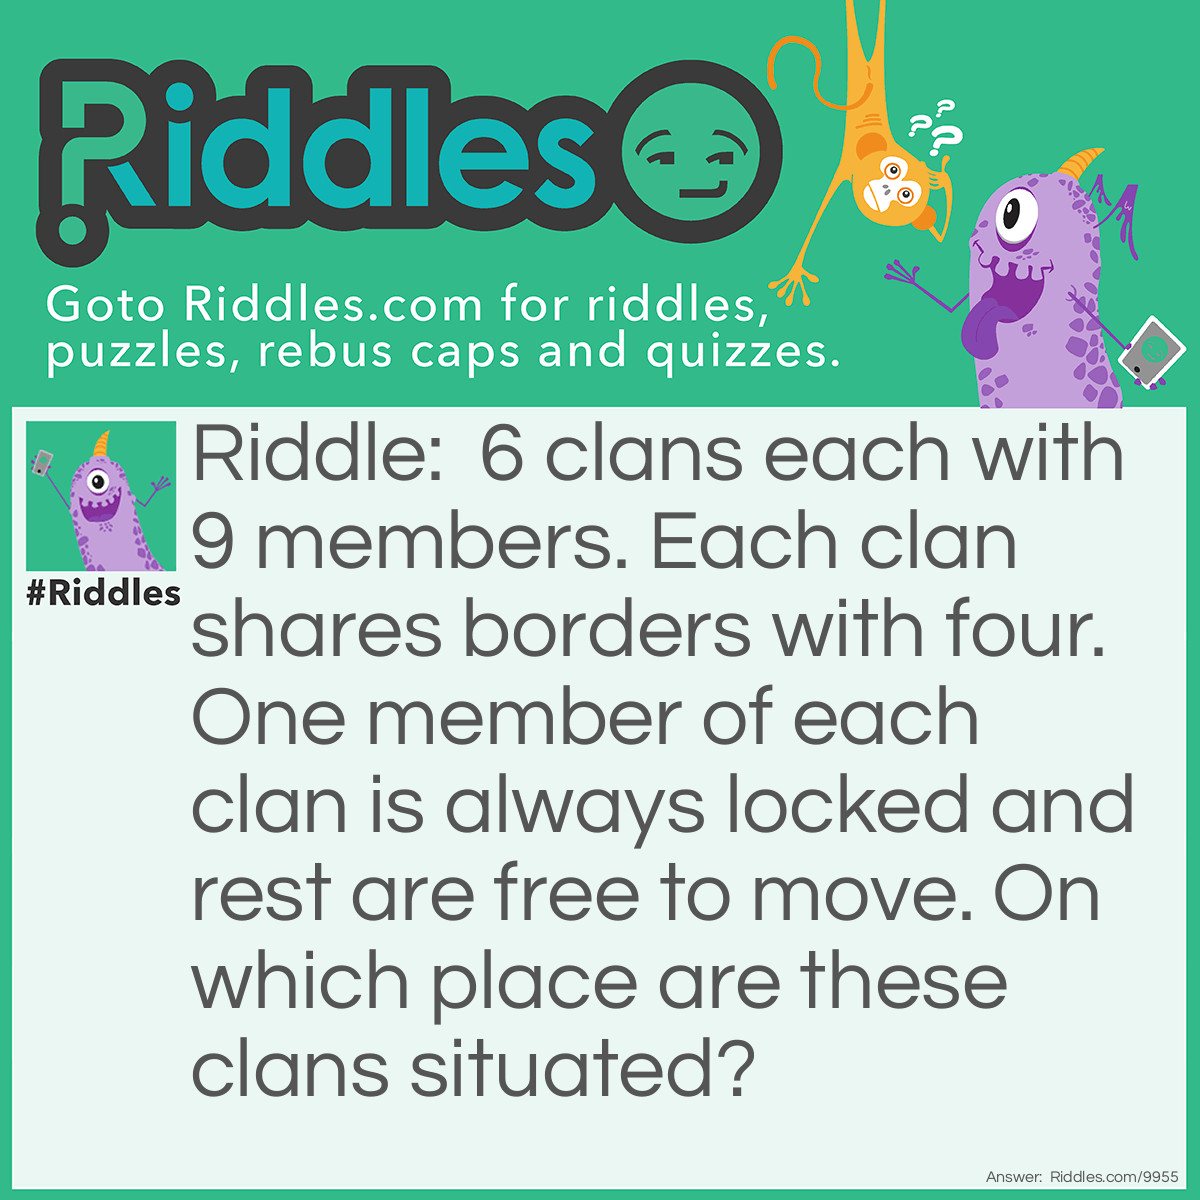 Riddle: 6 clans each with 9 members. Each clan shares borders with four. One member of each clan is always locked and rest are free to move. On which place are these clans situated? Answer: 3×3 Rubik's Cube